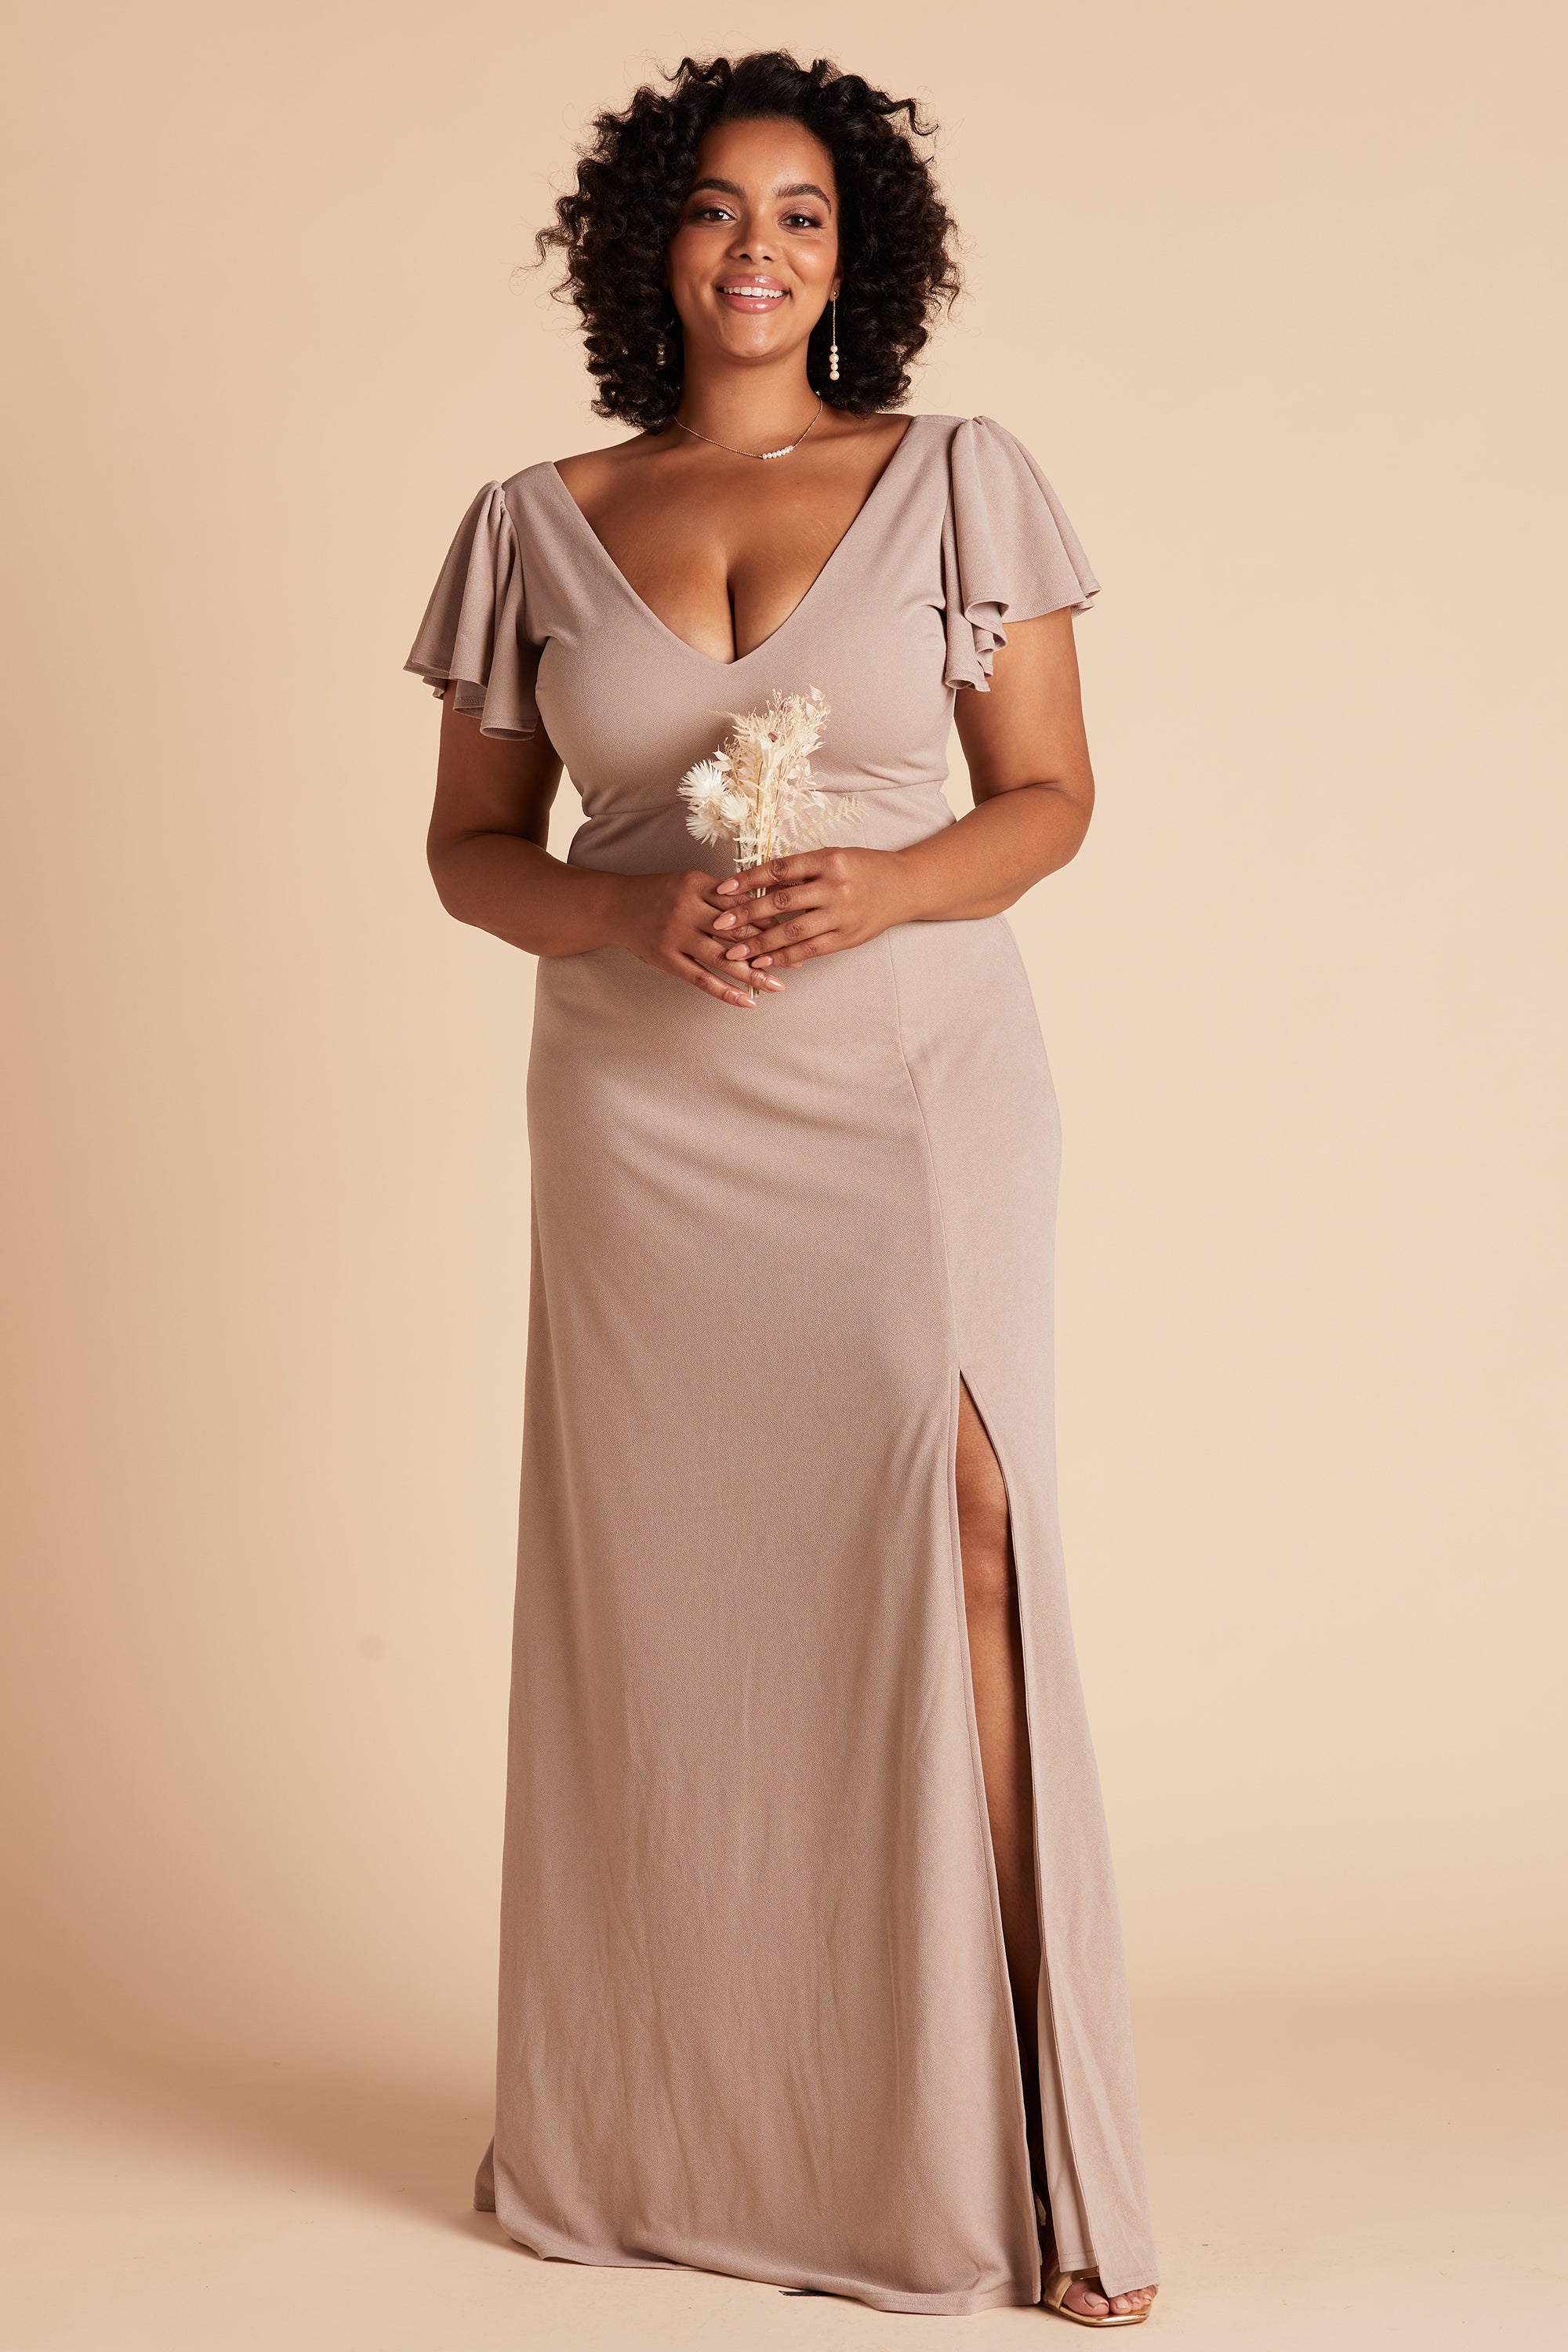 Taupe Hannah Crepe Dress by Birdy Grey